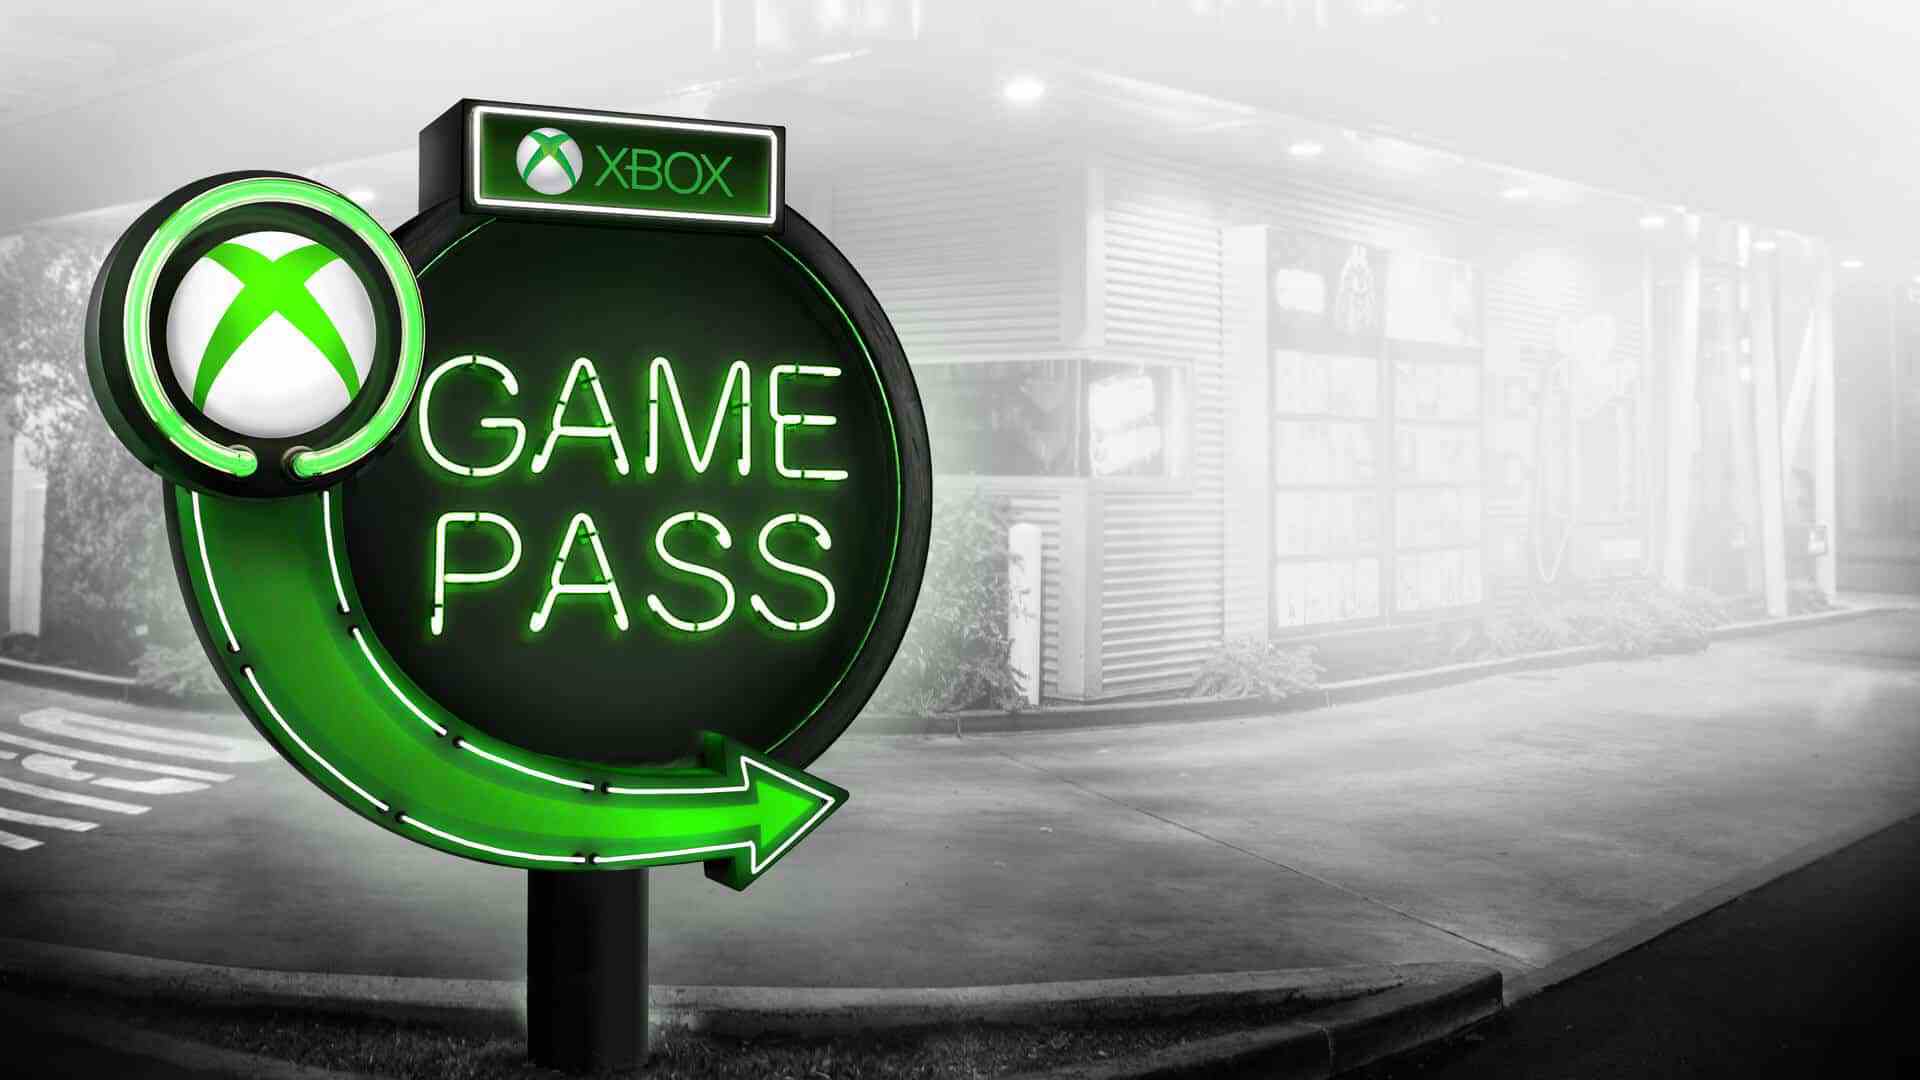 Microsoft Employees Are Having Their Free Game Pass Benefit